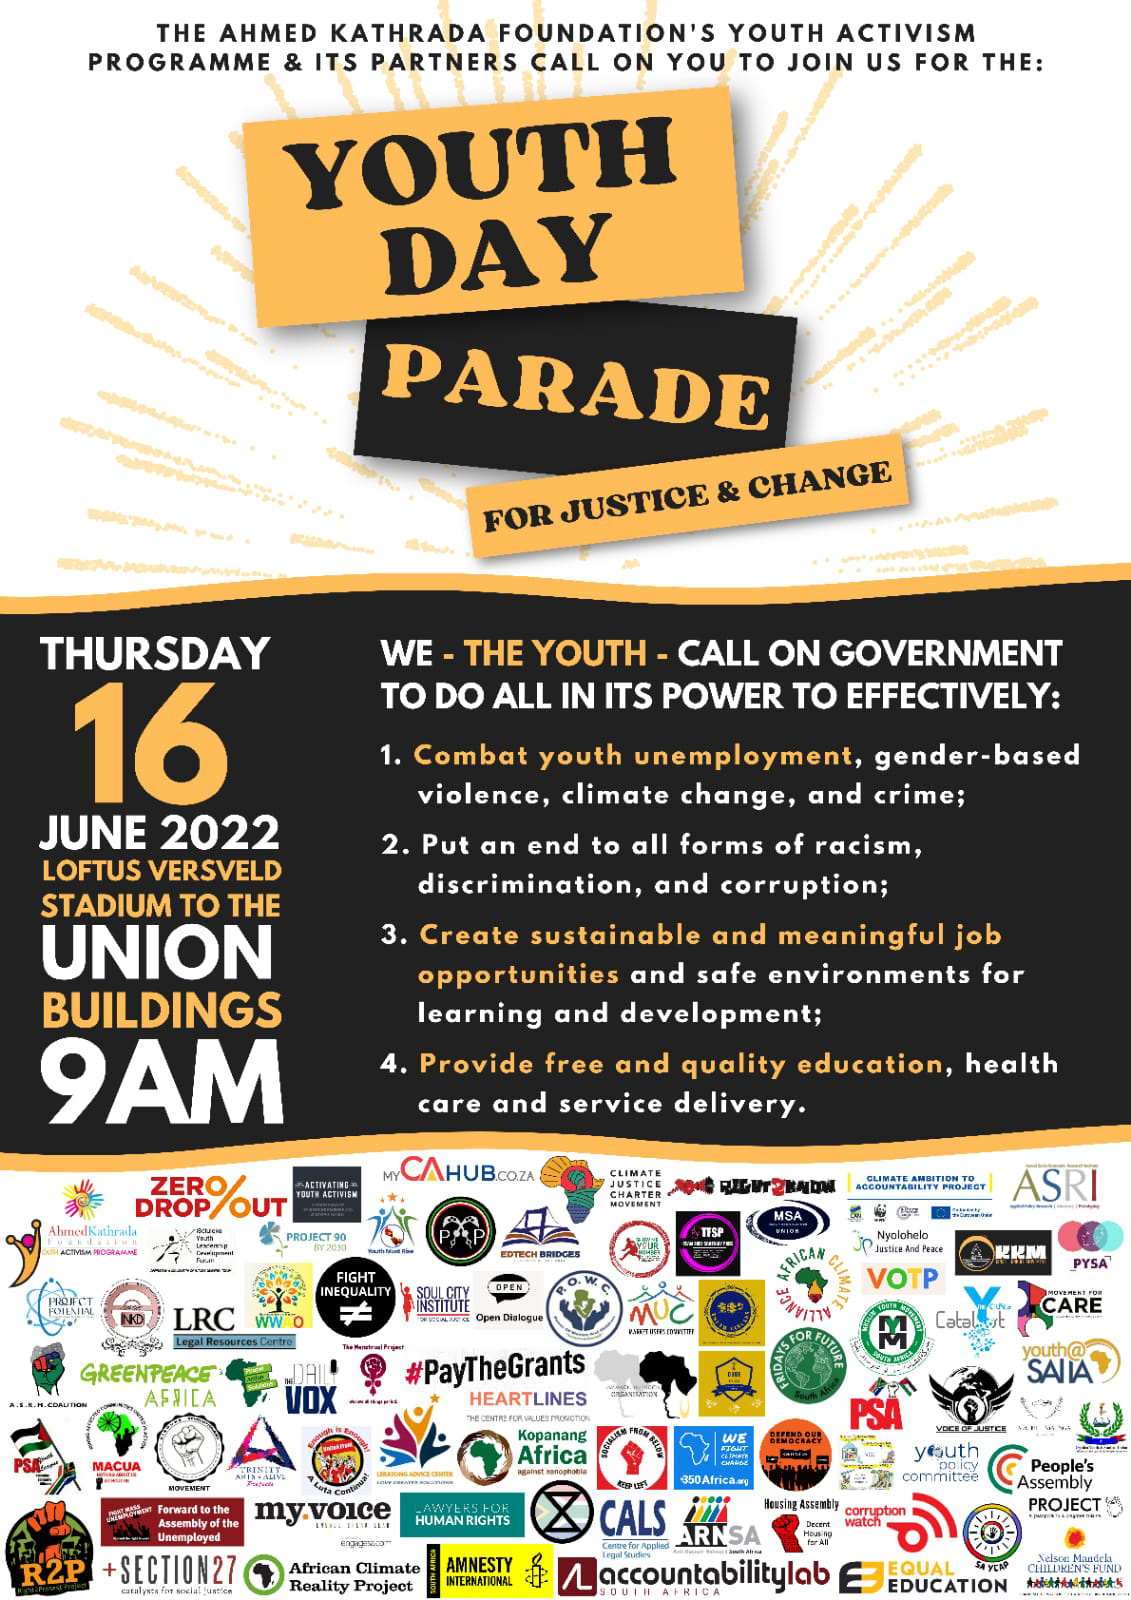 A poster advertising the Youth Day parade